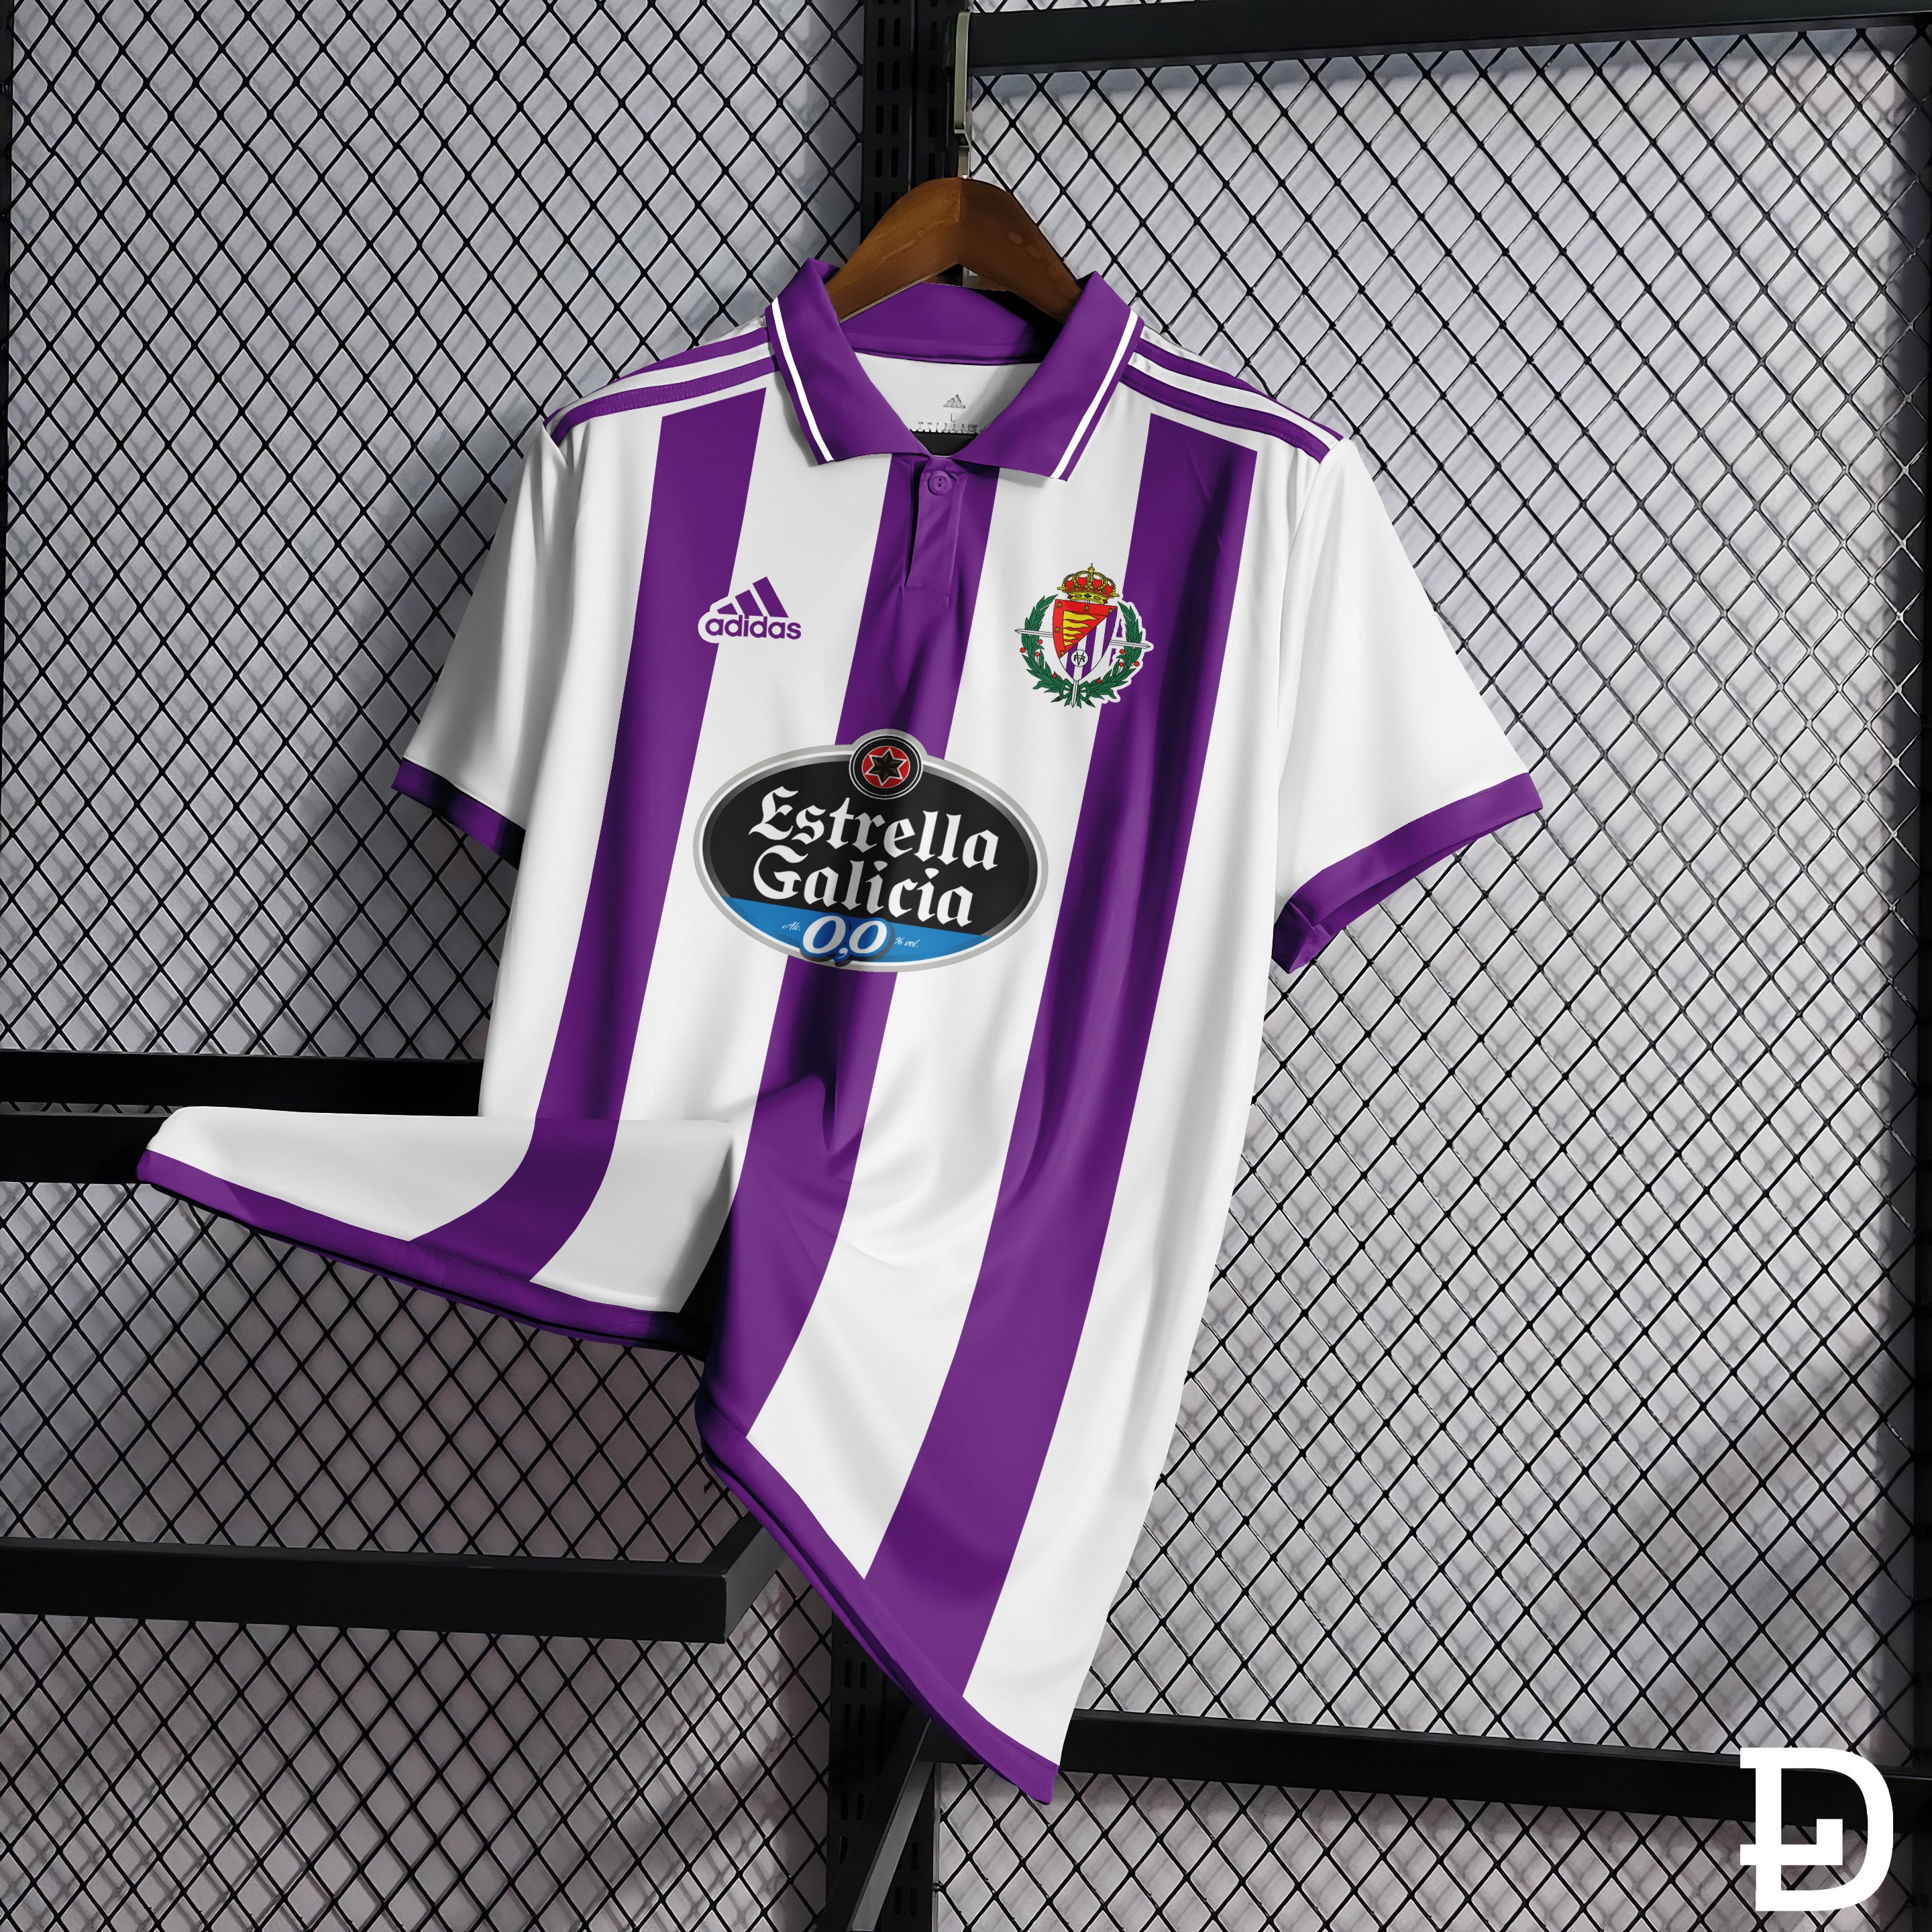 LautaDesign on Twitter: "Real Valladolid CF Home Kit Concept 2022/23 #RealValladolid #RVCF #pucela #adidas #AdidasFootball #Football https://t.co/Js1Kbm3DbP" / Twitter